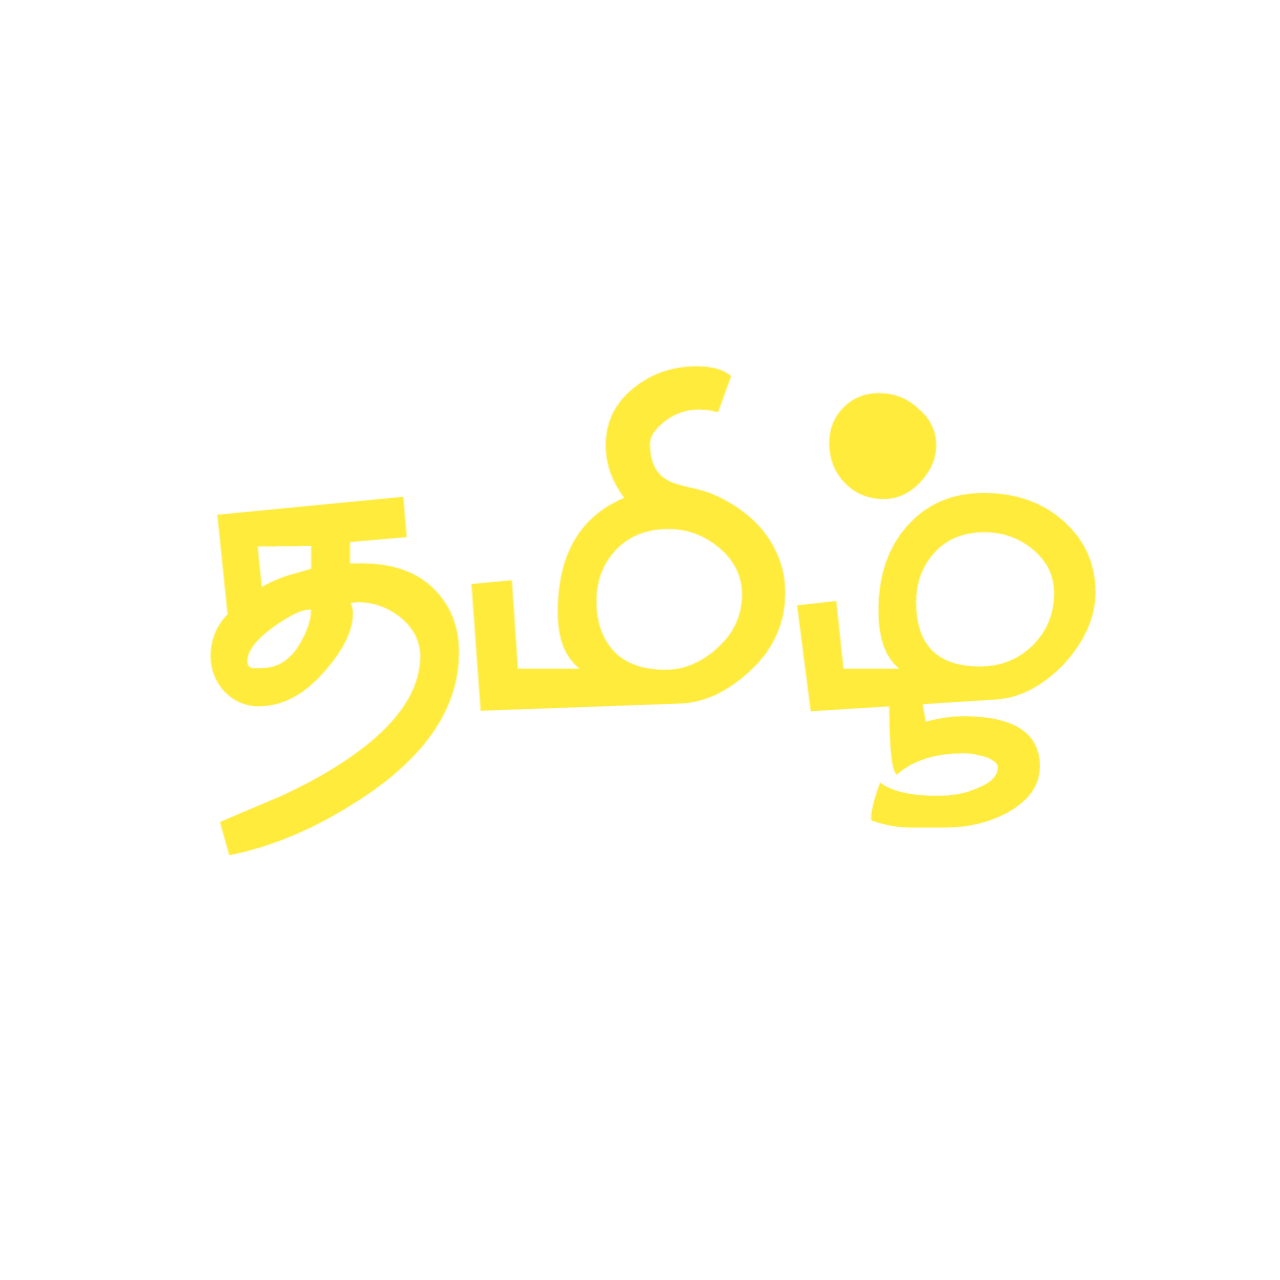 Tamil font ttf collection 23- download free tamil fonts_ stylish tamil fonts